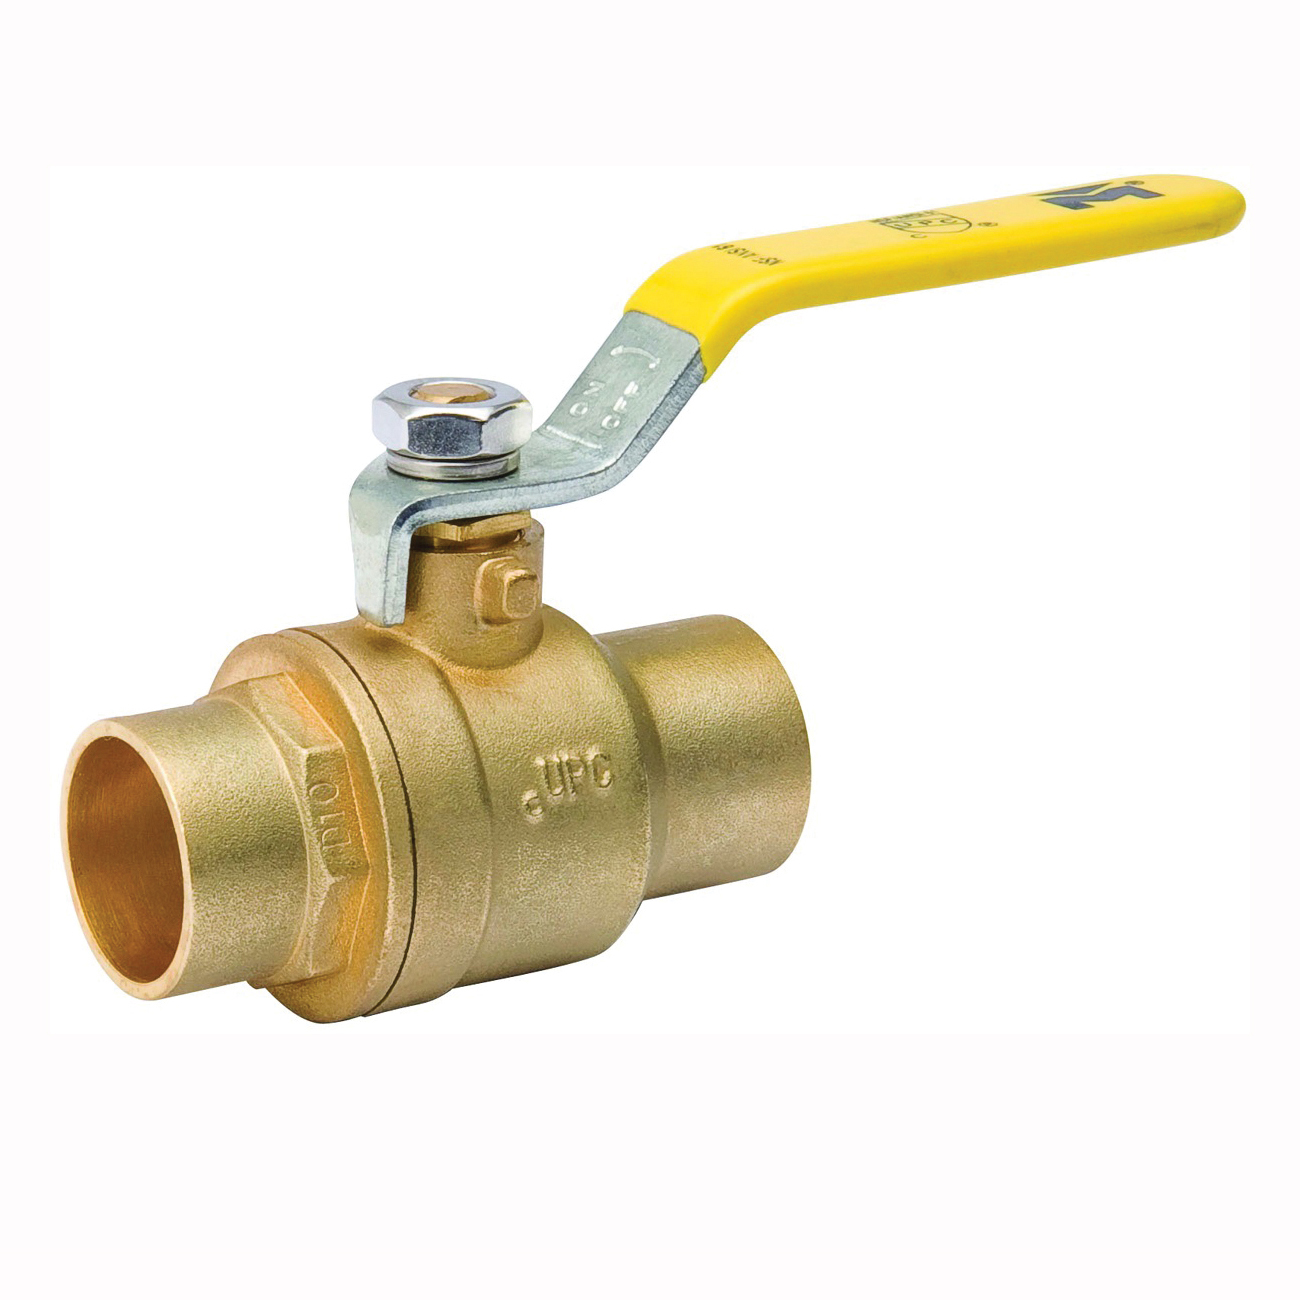 107-847NL Ball Valve, 1-1/2 in Connection, Compression, 600/150 psi Pressure, Manual Actuator, Brass Body